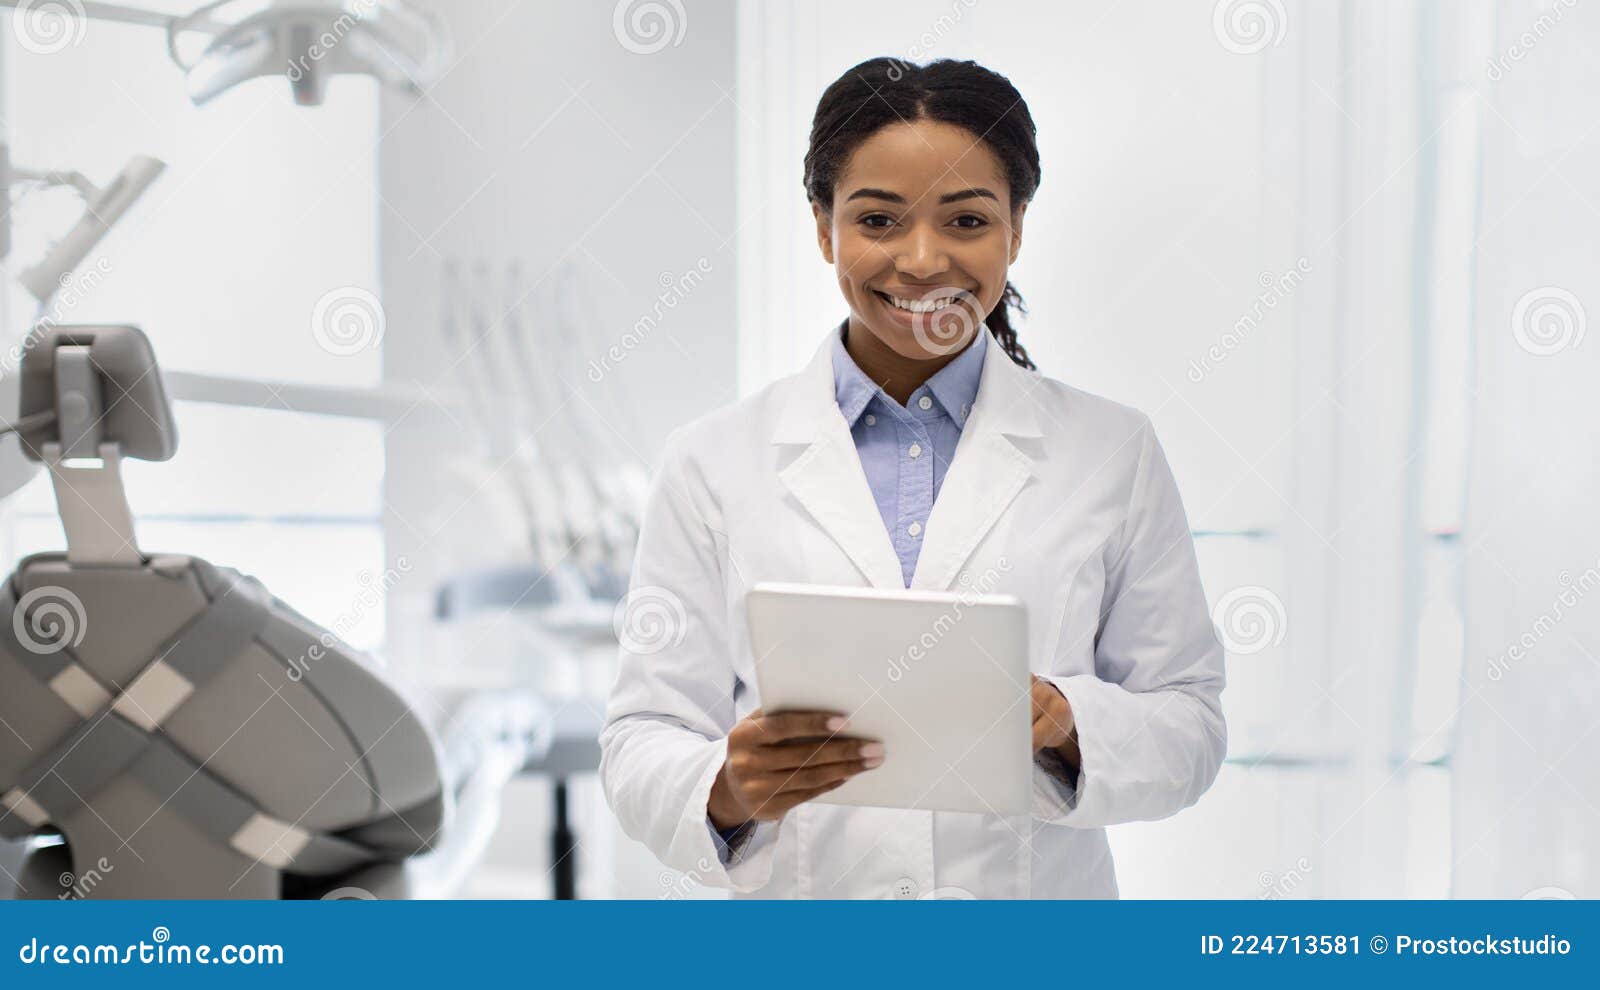 A Female Dentist Is Looking Into A Dental Microsco Royalty-Free Stock ...